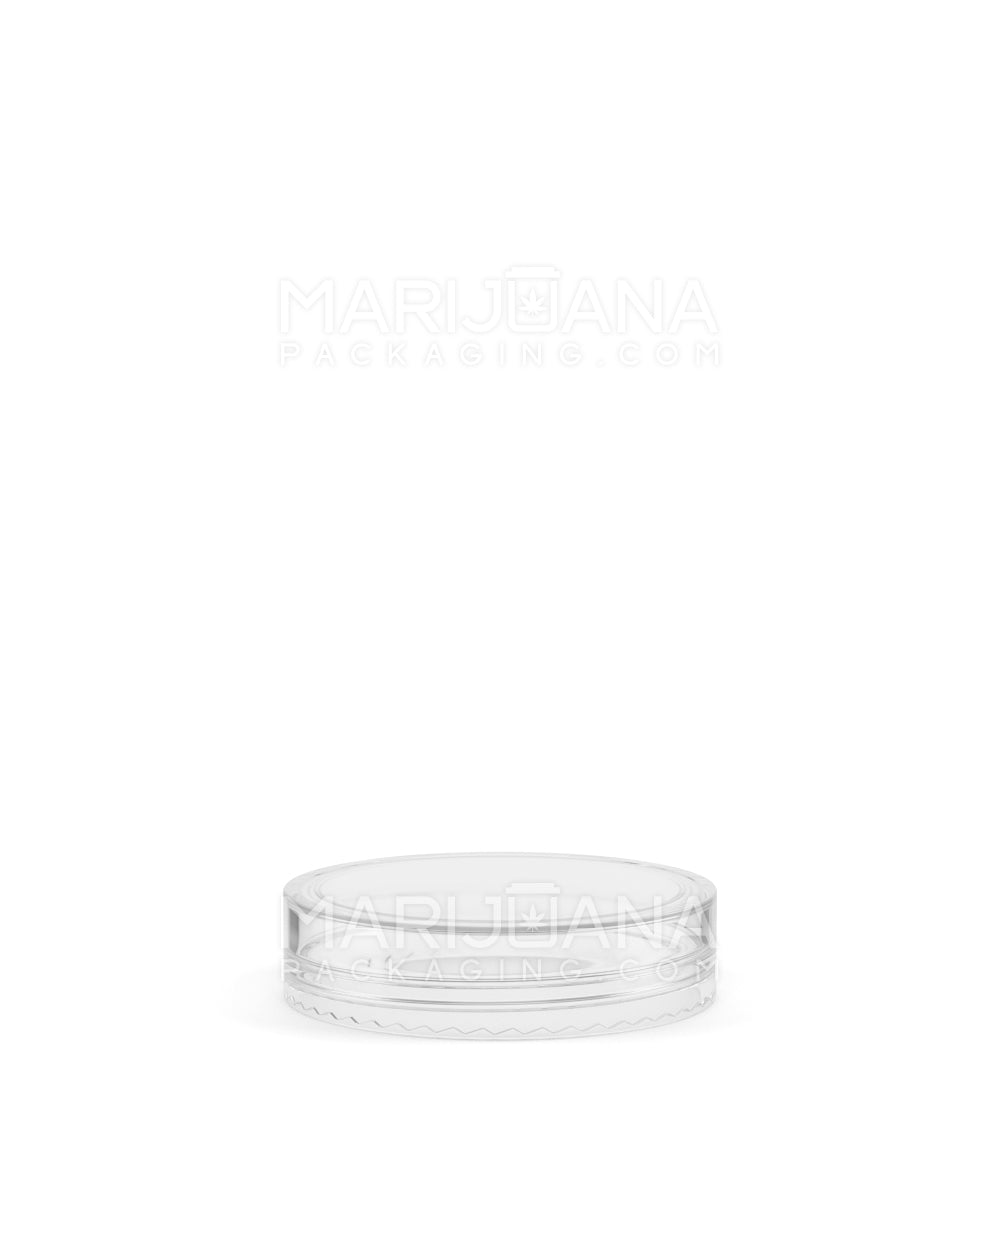 Clear Concentrate Containers w/ Screw Top Cap & White Silicone Insert | 10mL - Plastic - 100 Count - 12